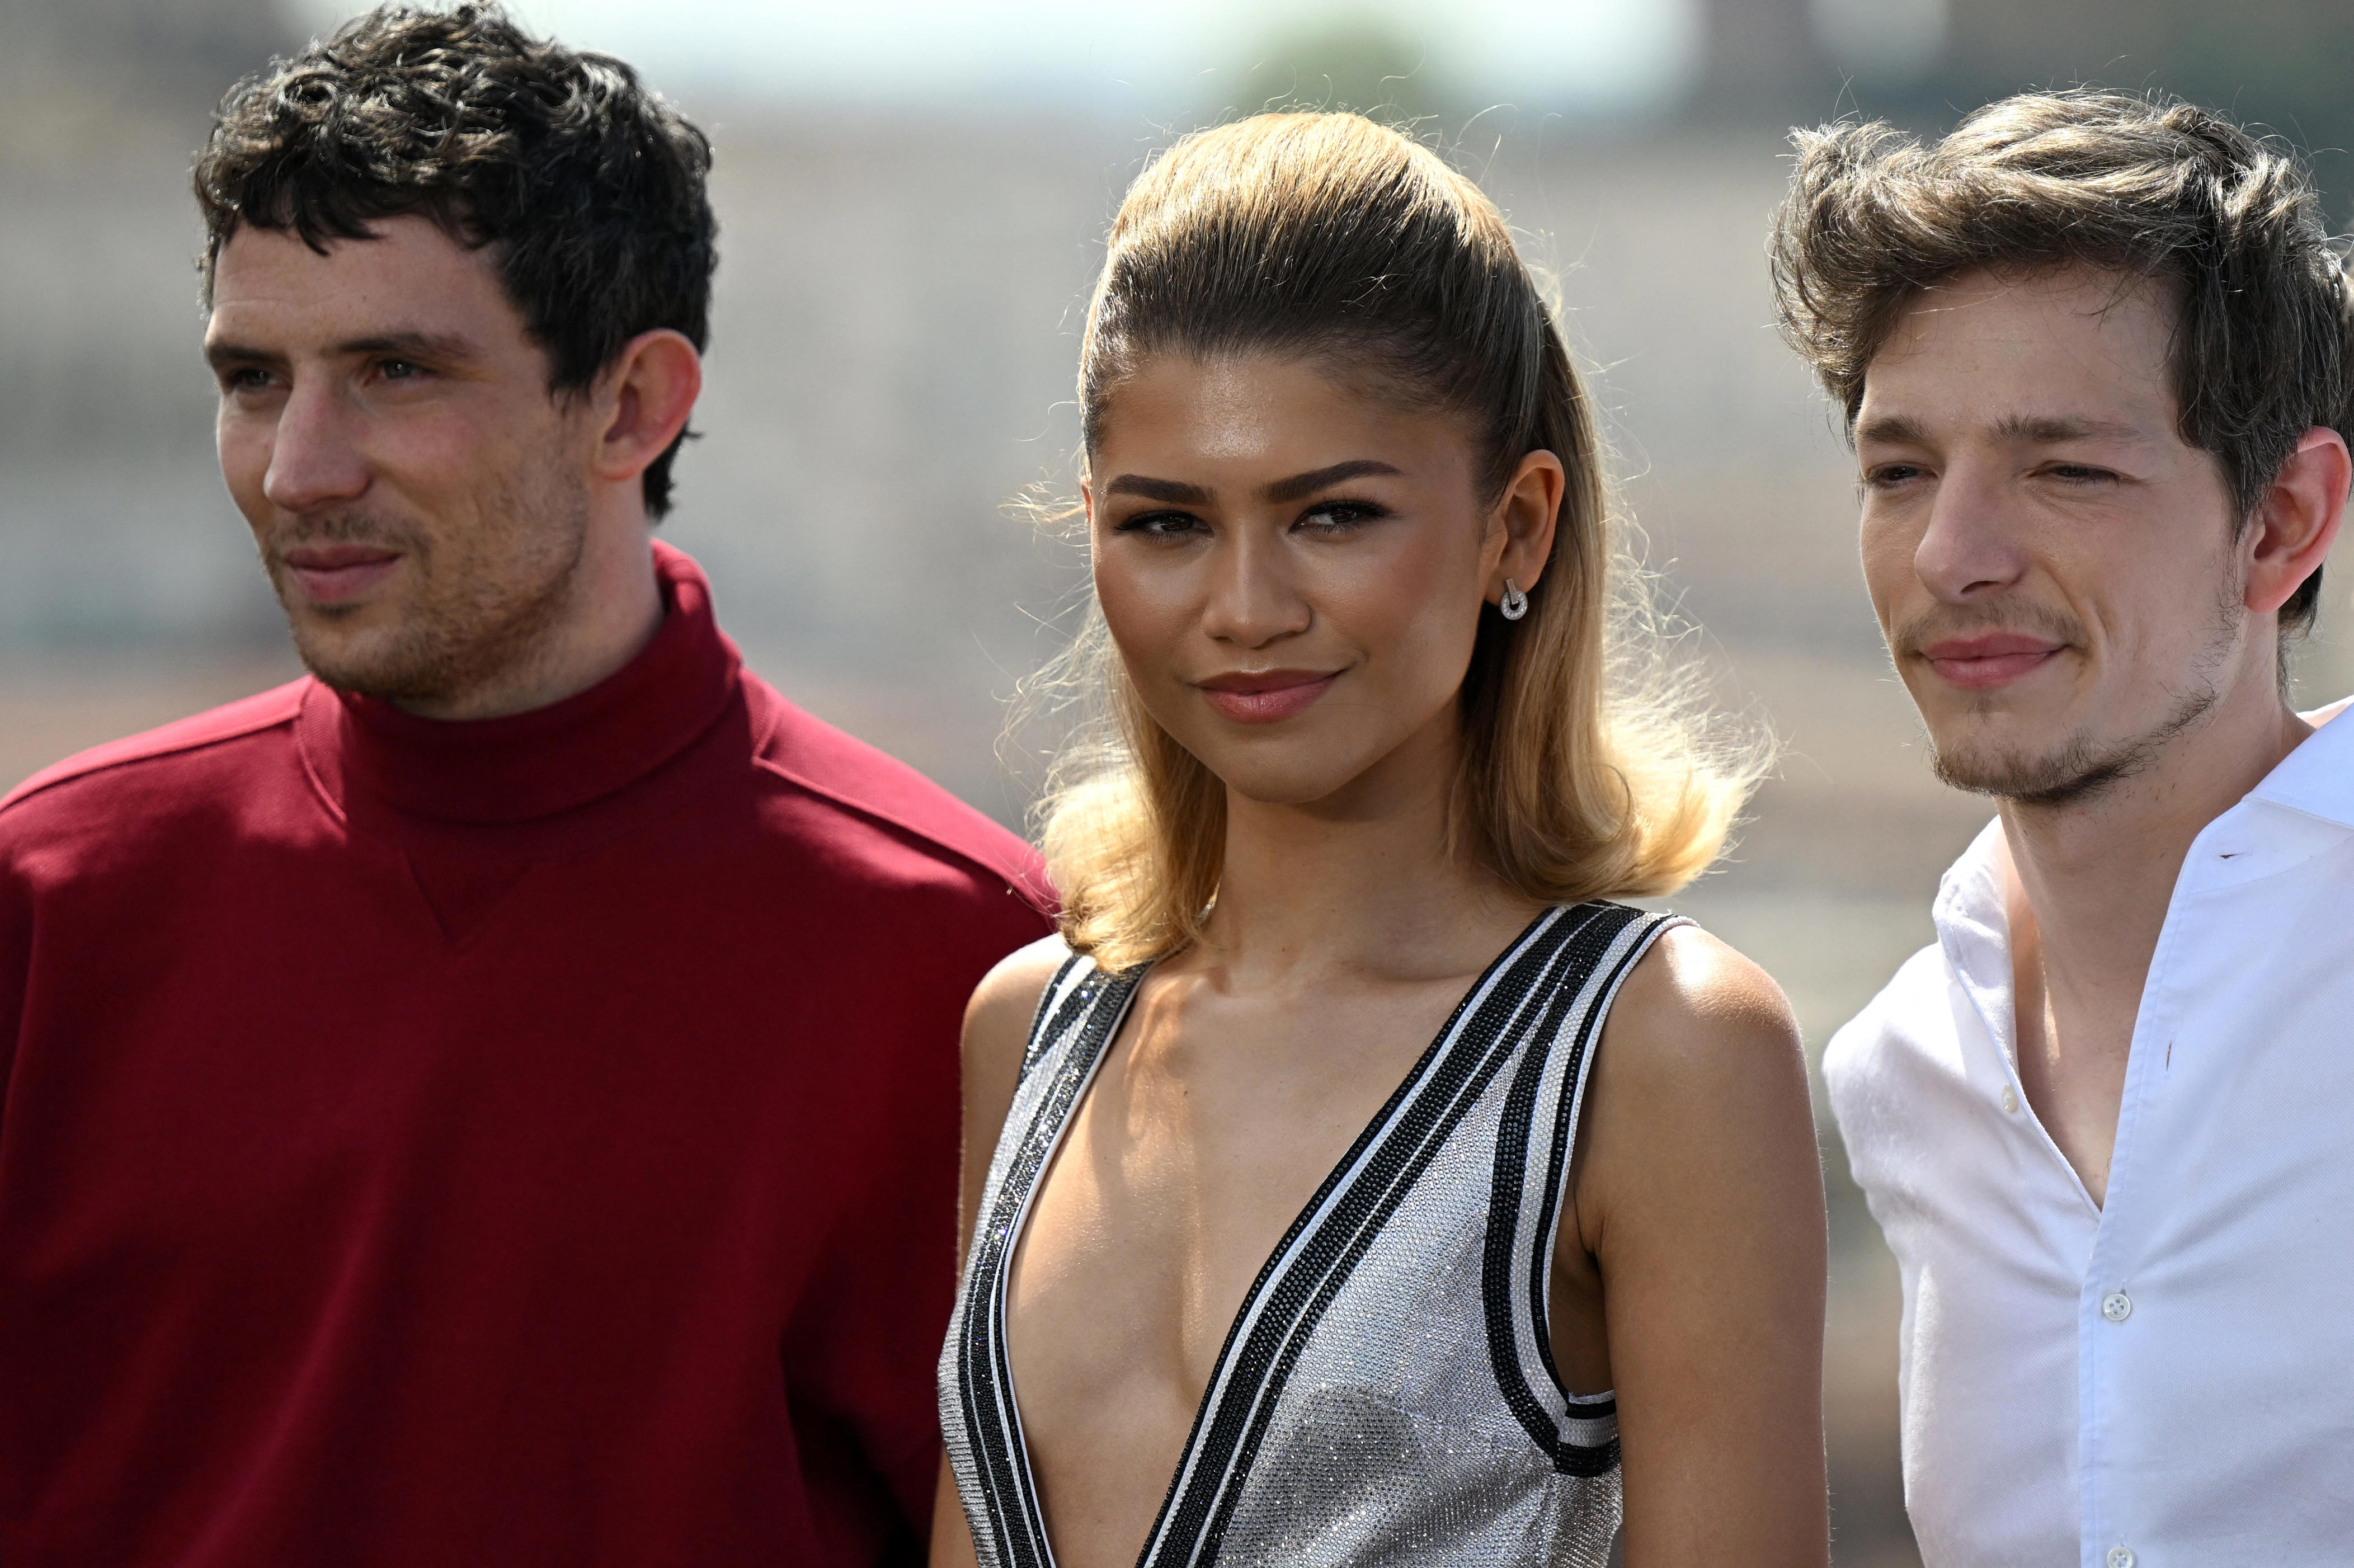 challengers cements zendaya with leading lady status